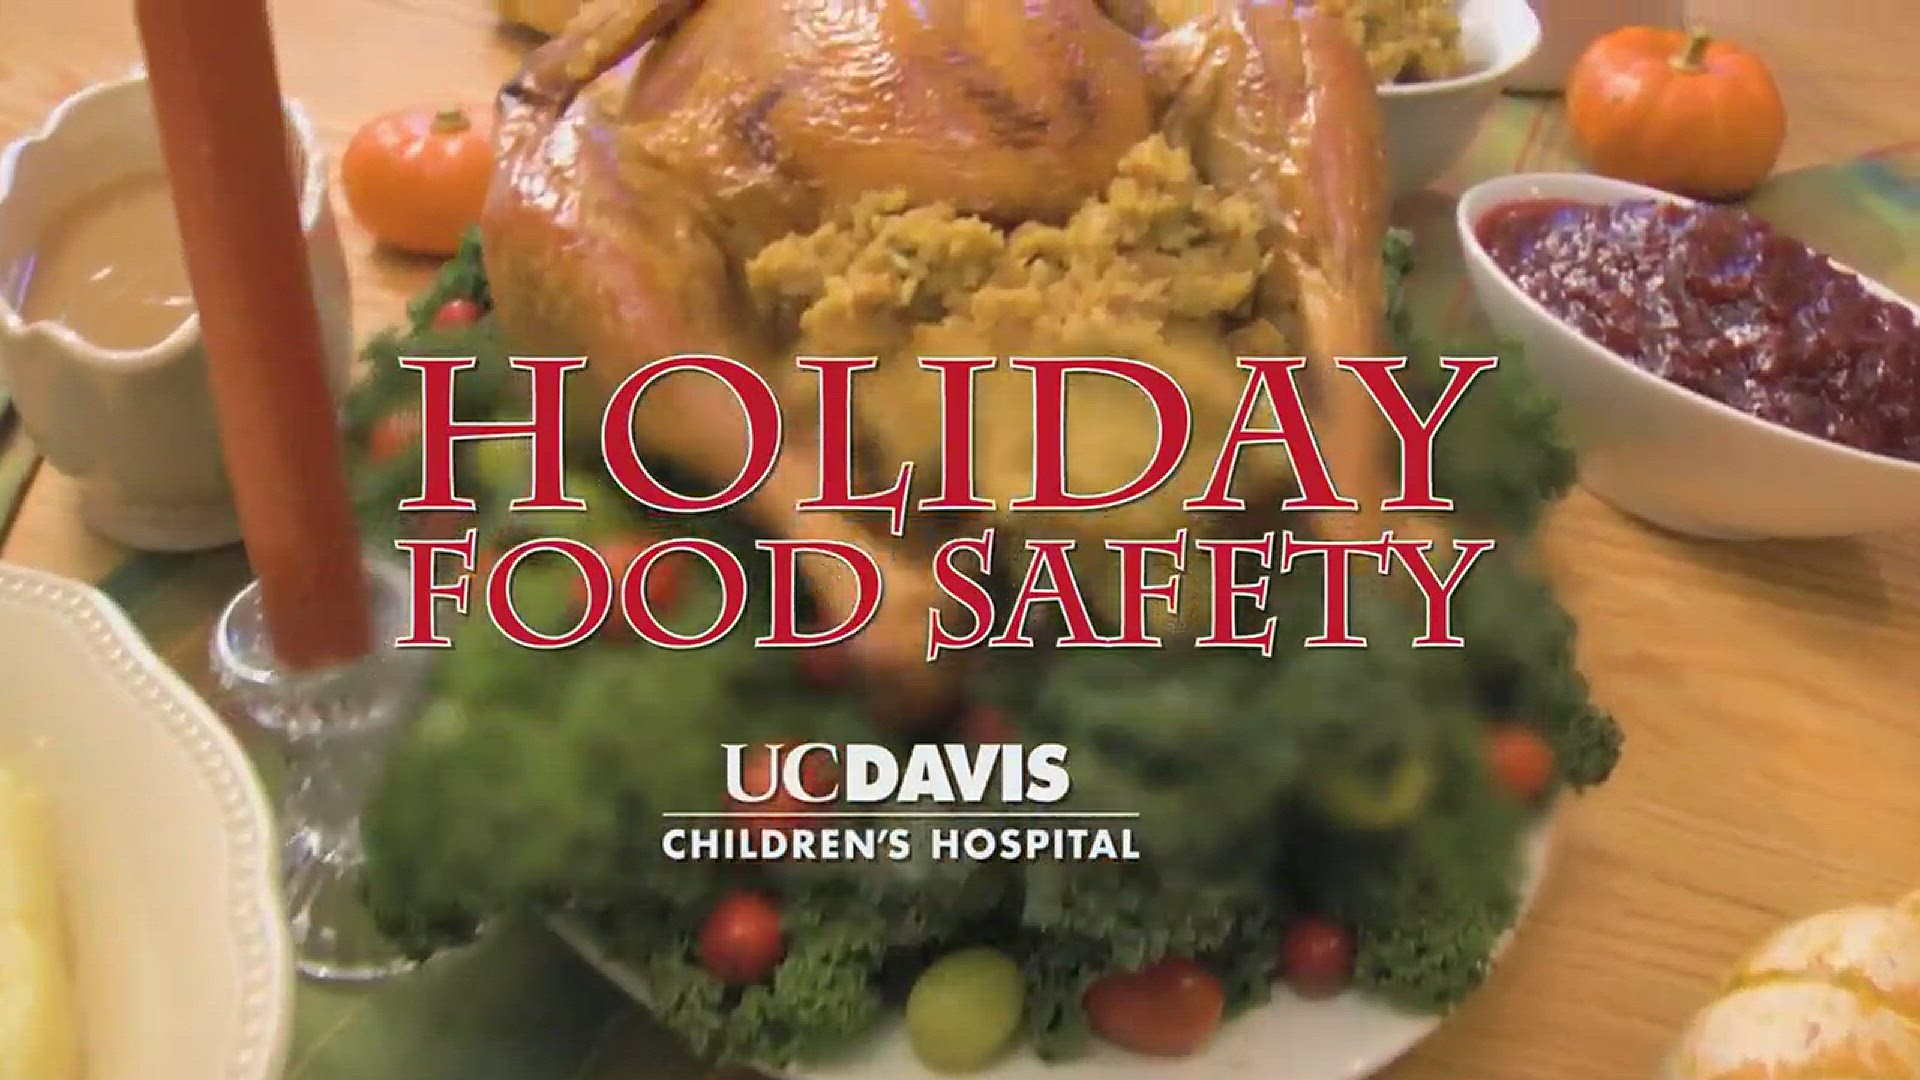 ABC10's 10 Books to Read is brought to you by UC Davis Children's Hospital.